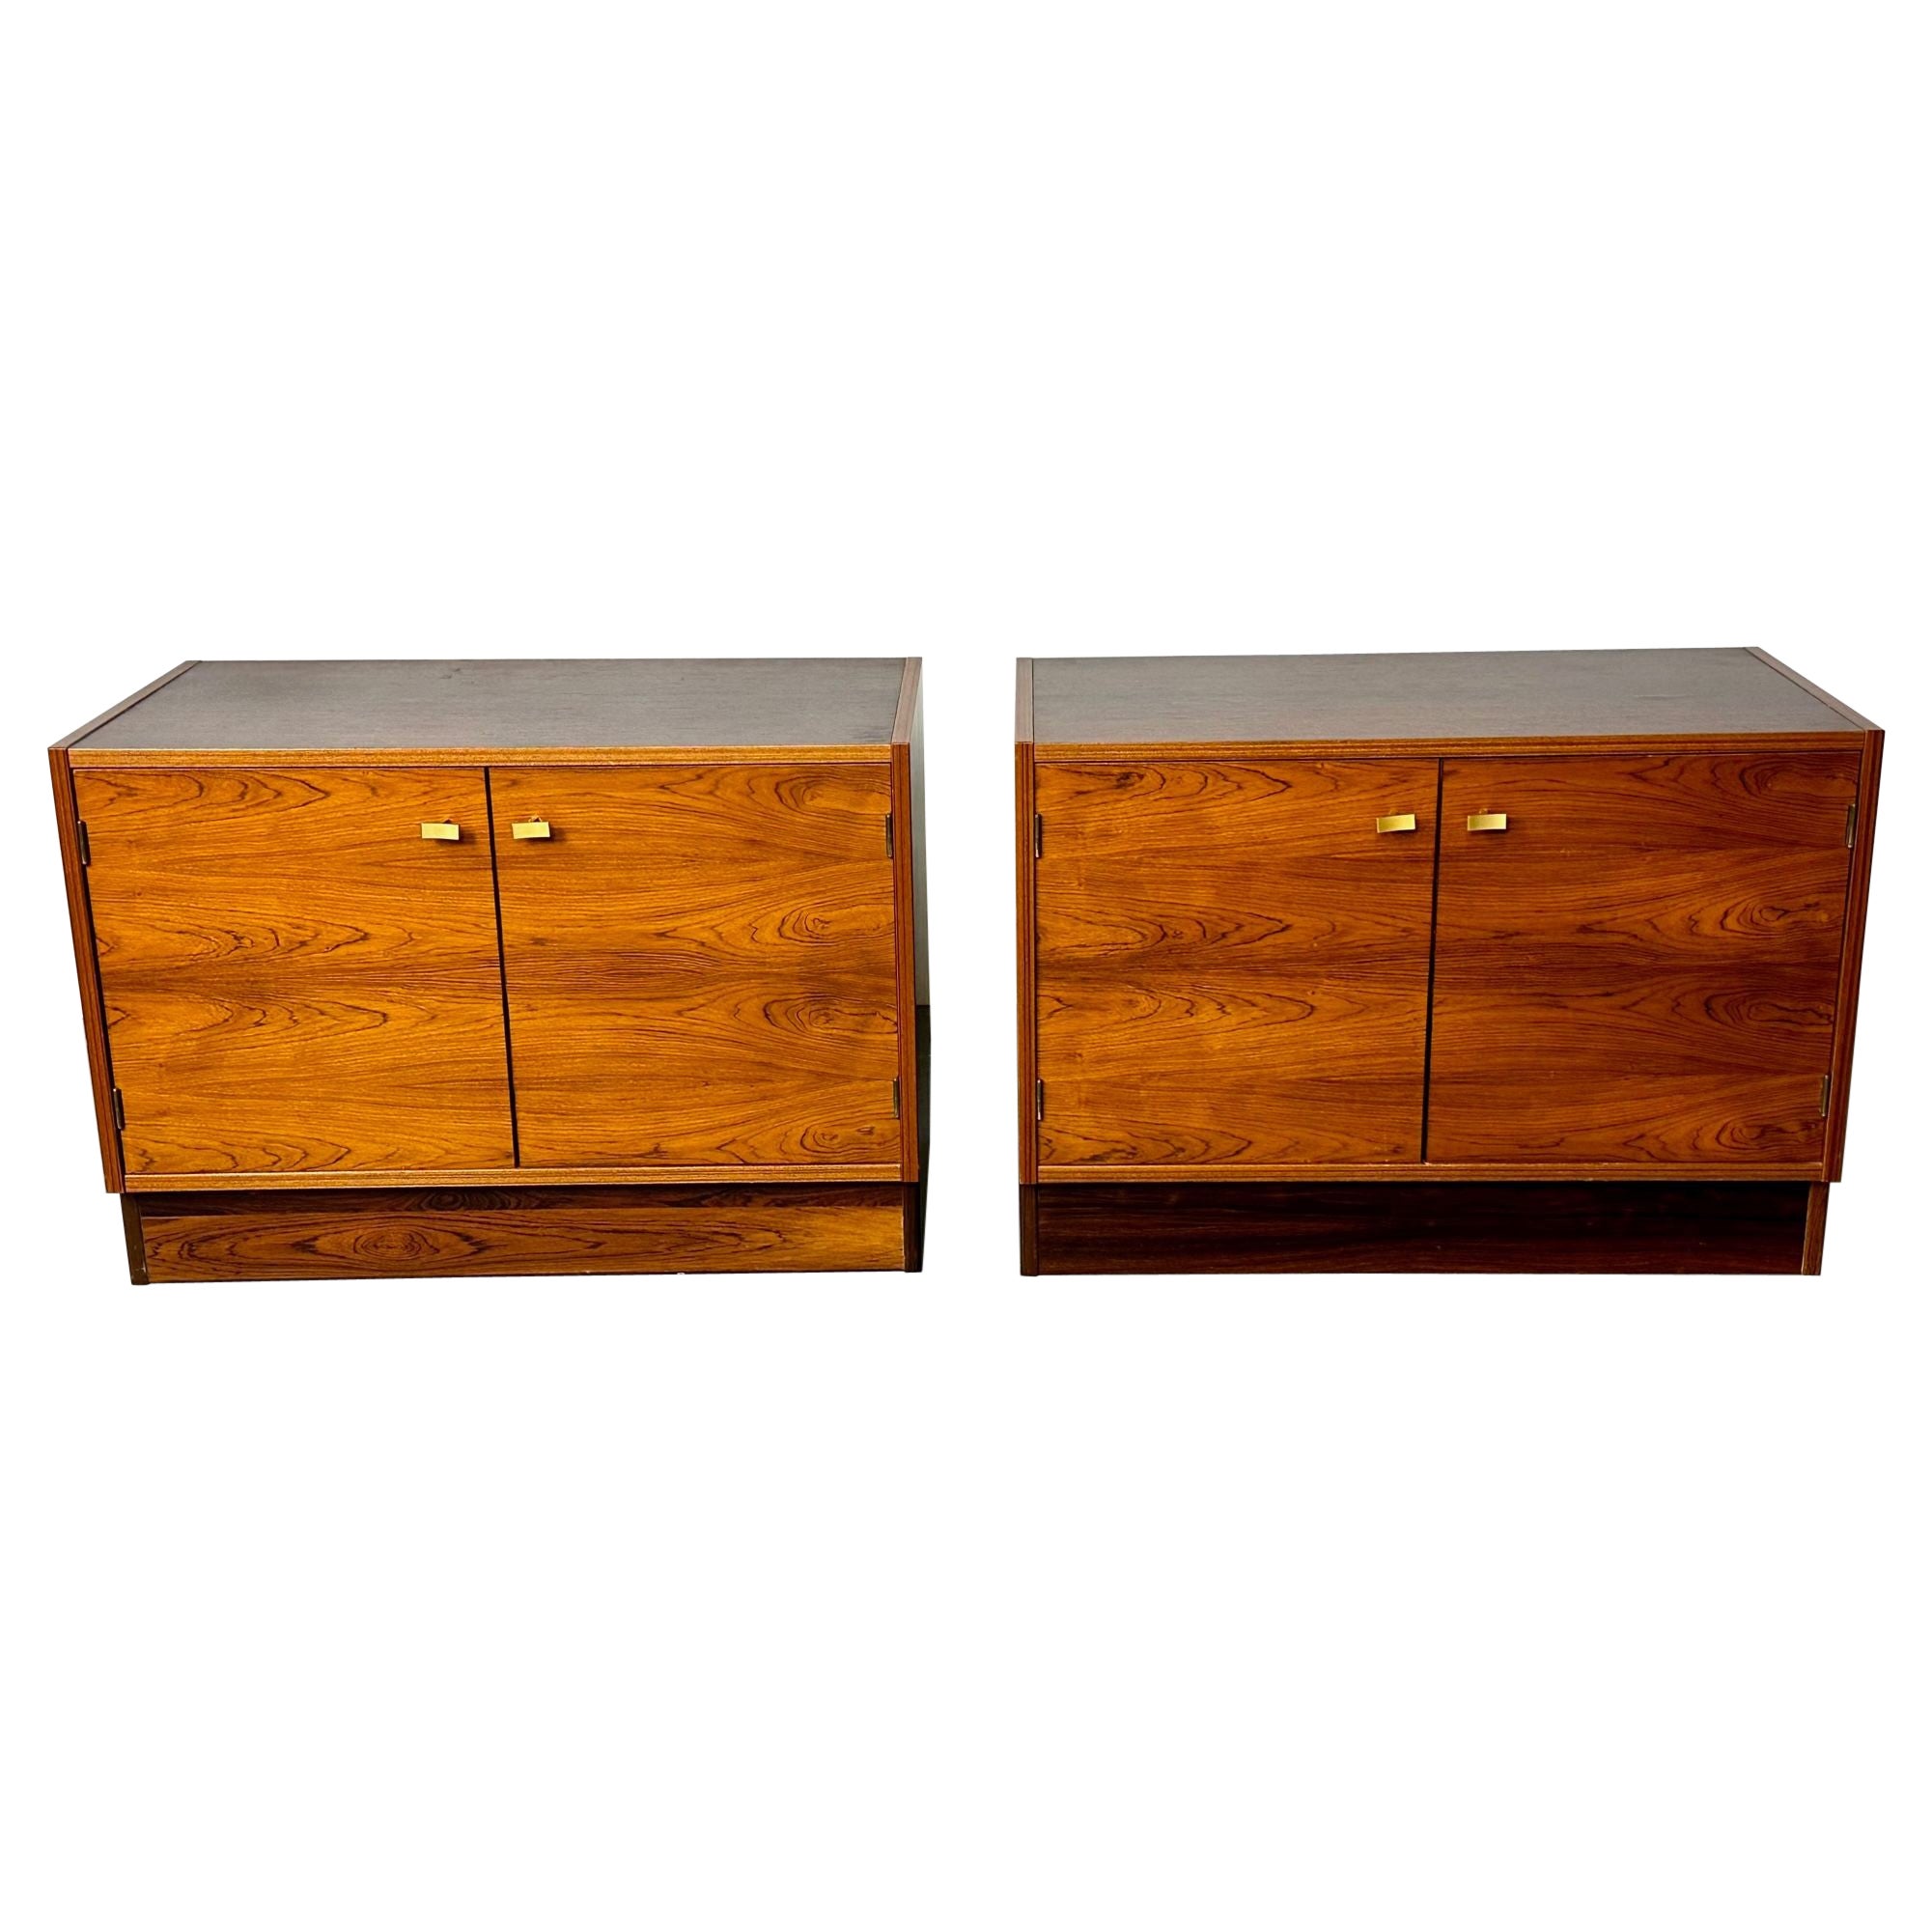 Pair Mid-Century Modern Rosewood Nightstands / Cabinets, Chests Brass Pulls